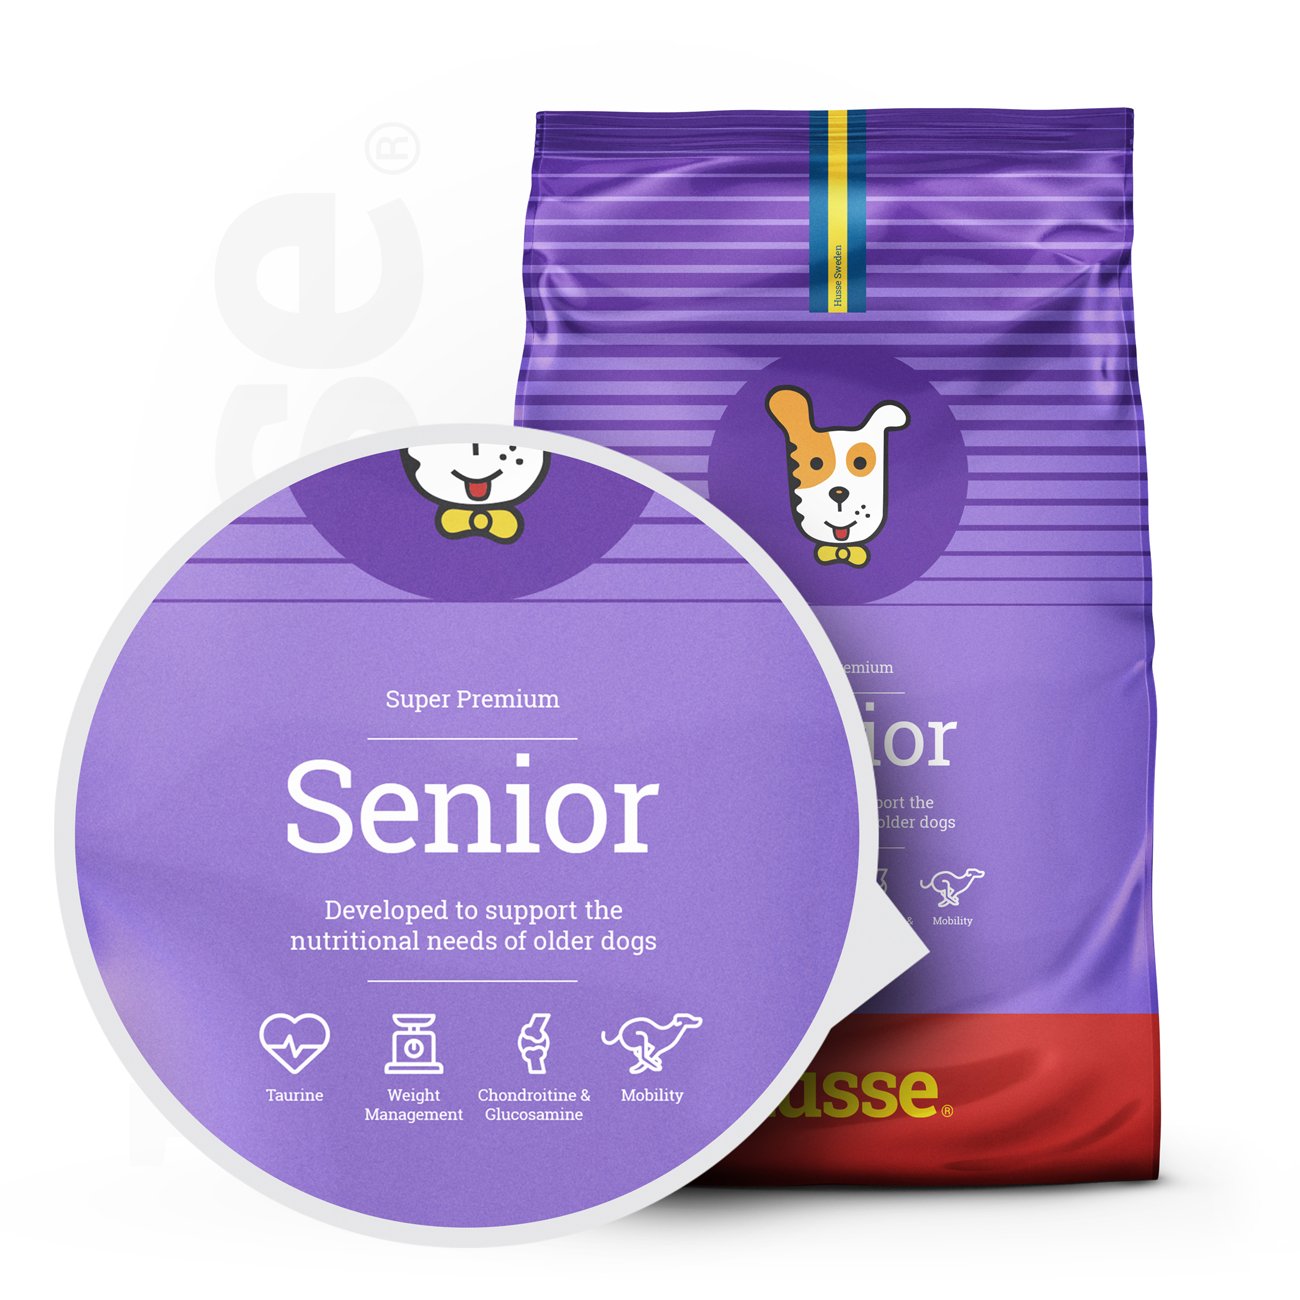 Complete with natural senior. Dogs’ nutritional needs.